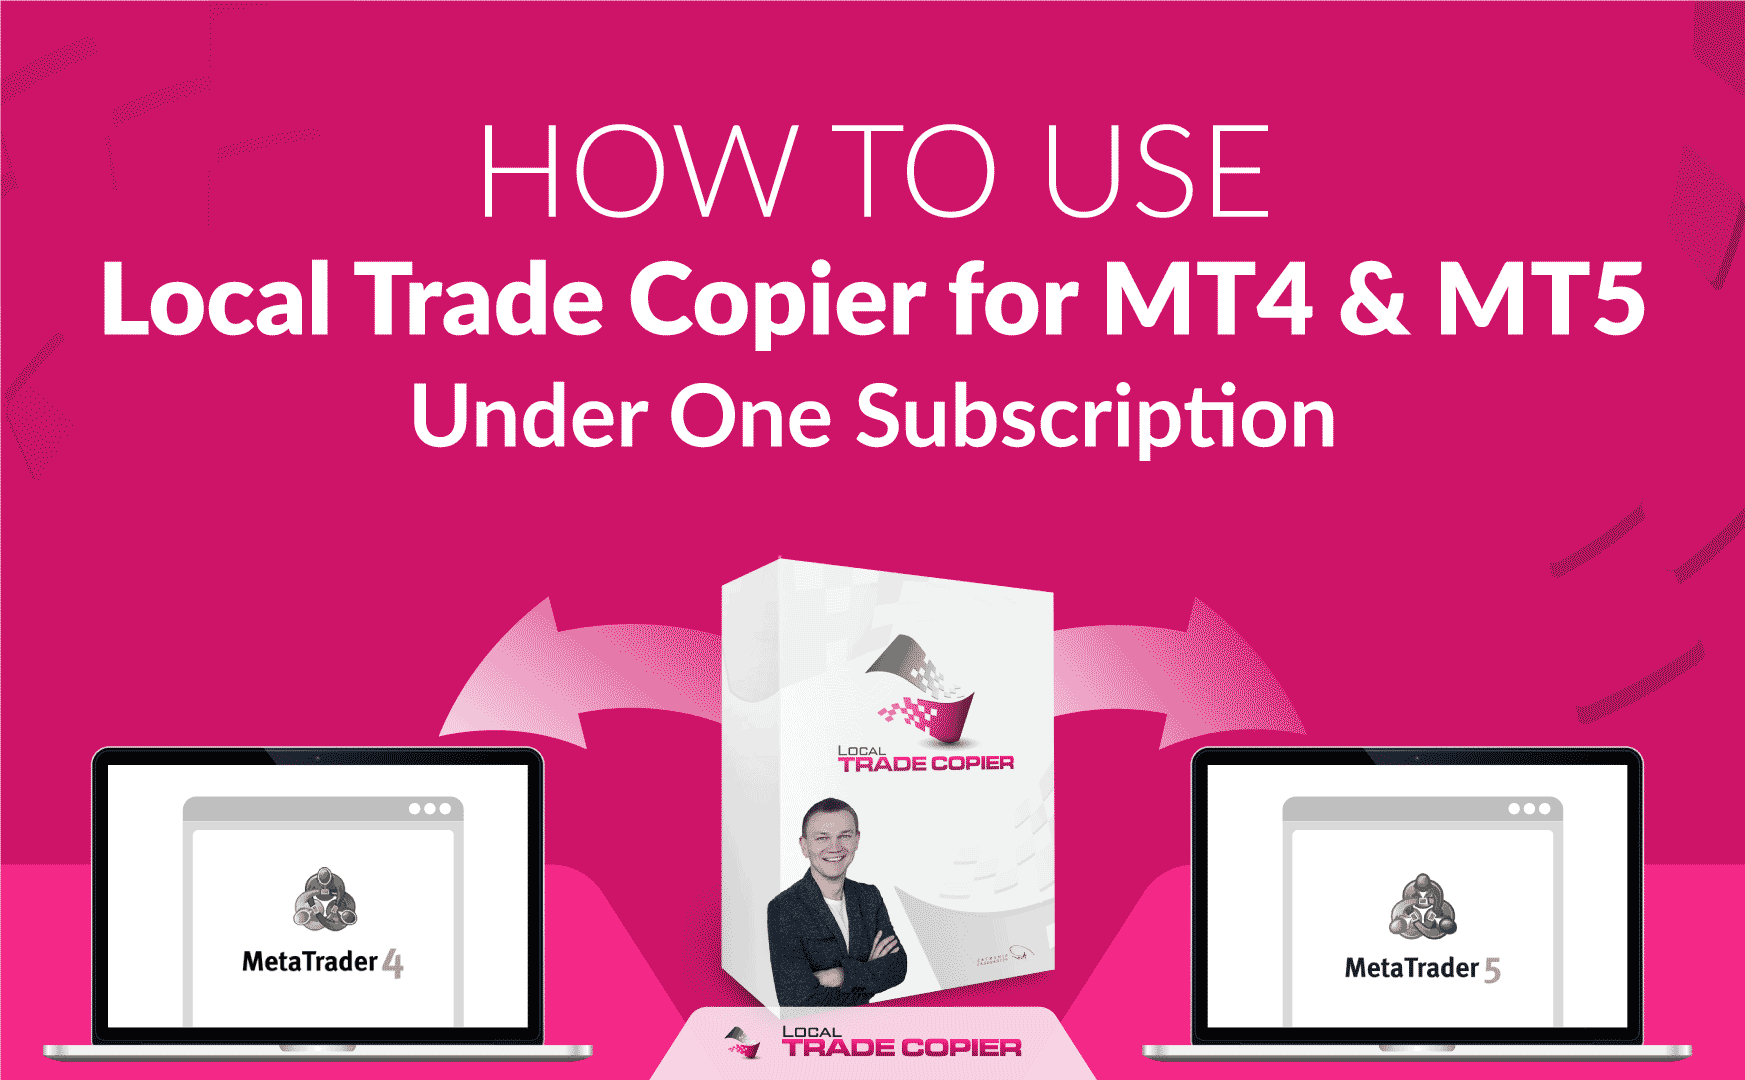 Local-Trade-Copier-Tutorials-How-To-Use-Local-Trade-Copier-for-MT4-&-MT5-Under-One-Subscription-1745x1080